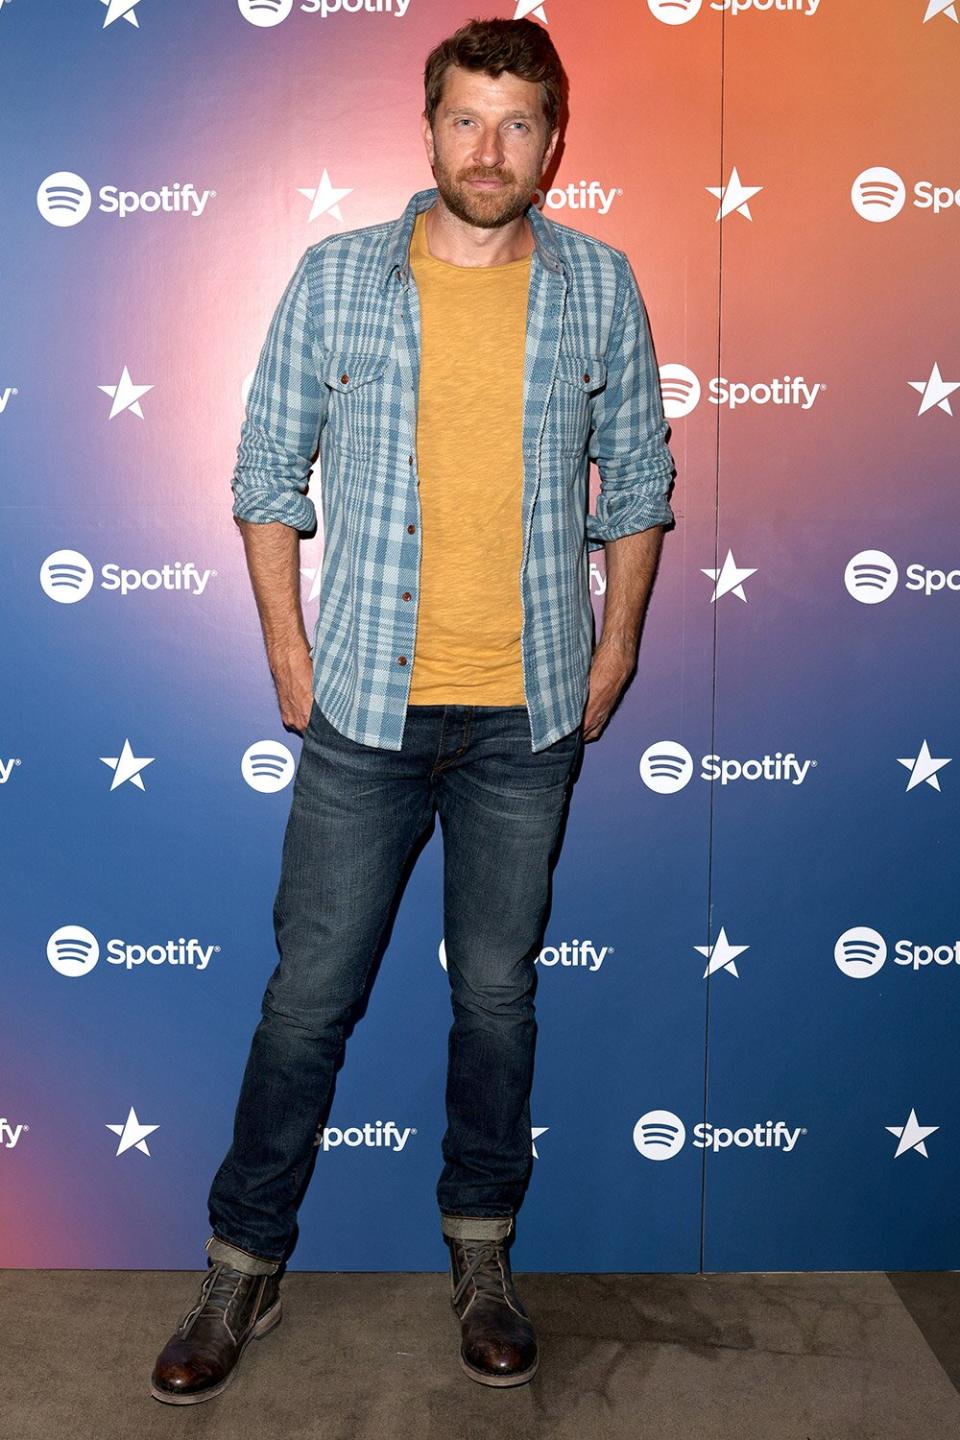 NASHVILLE, TENNESSEE - JUNE 09: Brett Eldredge visits Spotify House during CMA Fest at Ole Red on June 09, 2022 in Nashville, Tennessee. (Photo by Michael Hickey/Getty Images)